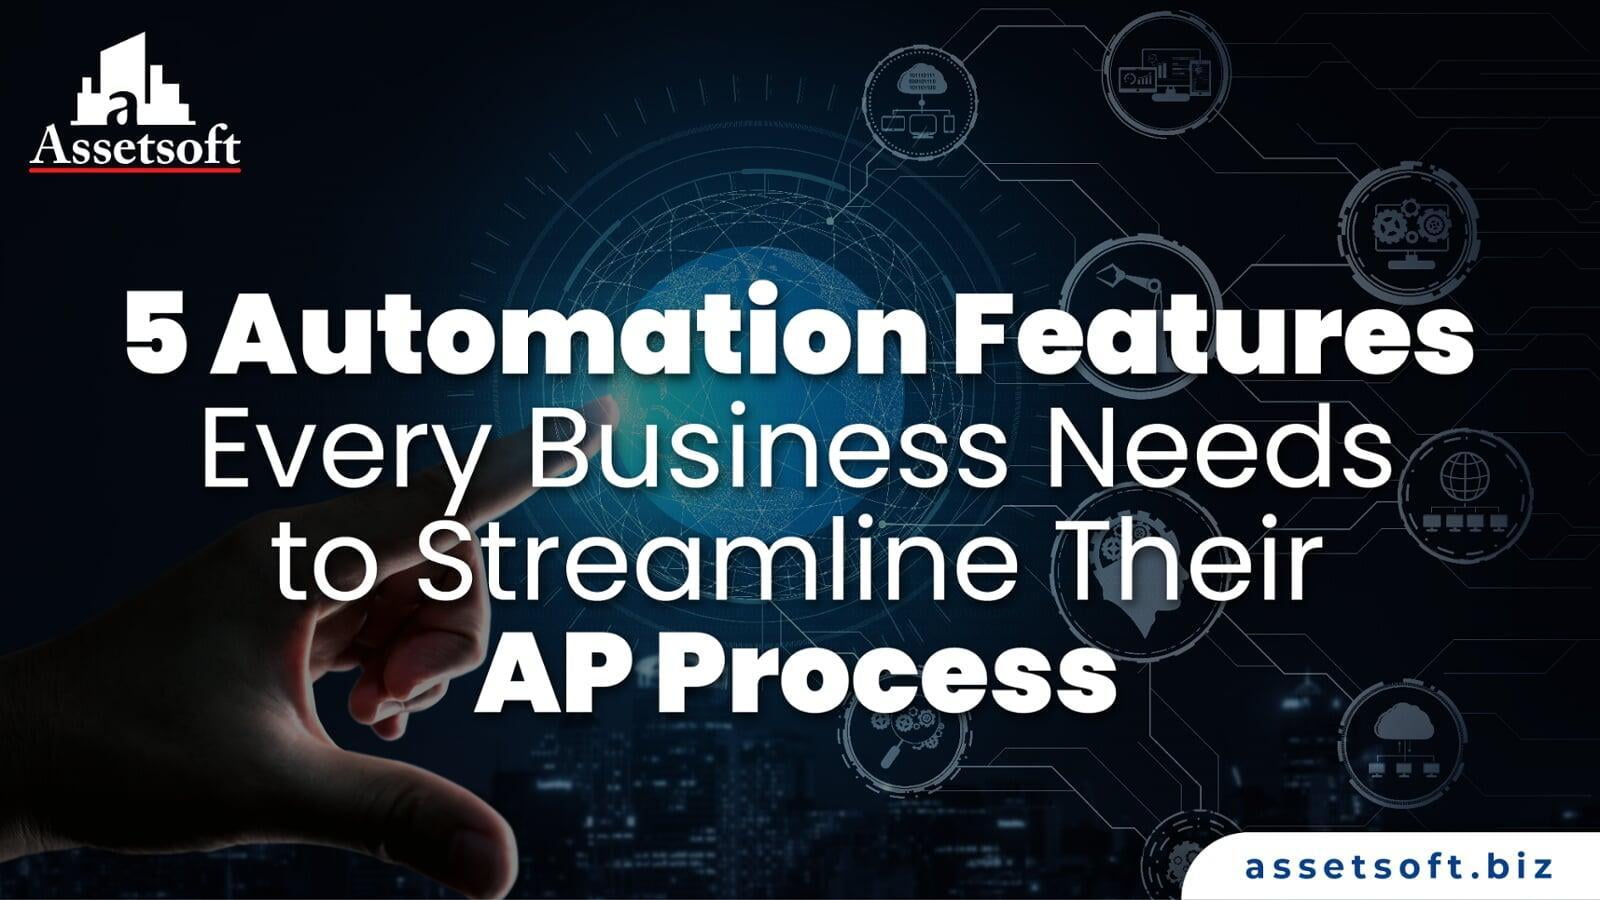 5 Automation Features Every Business Needs to Streamline Their AP Process 